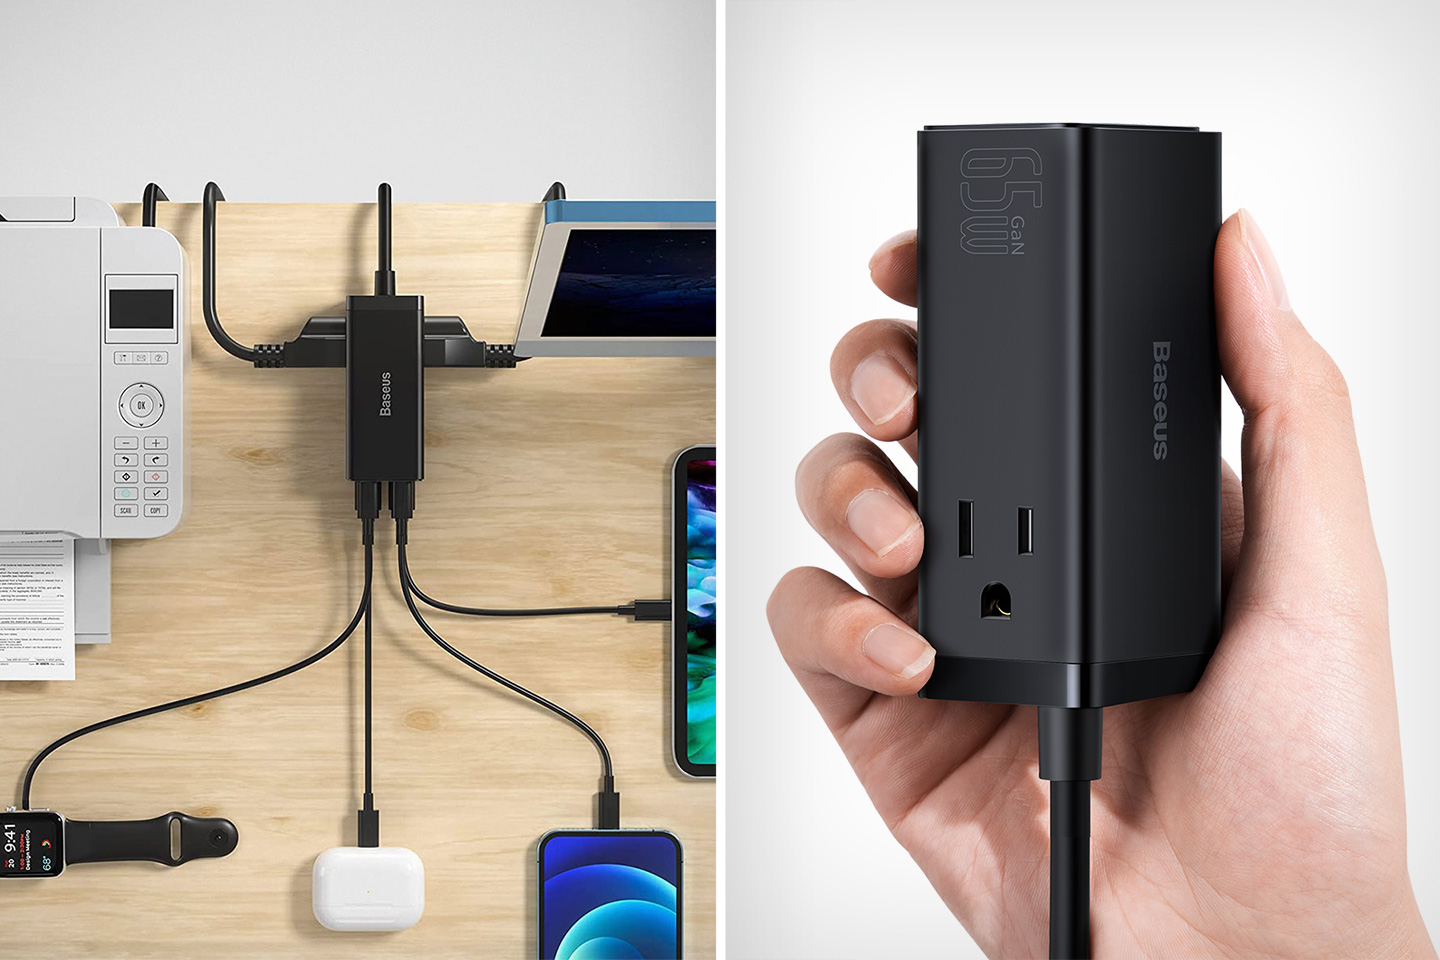 #This power brick replaces every single charger you need, keeping your desk clutter-free and organized